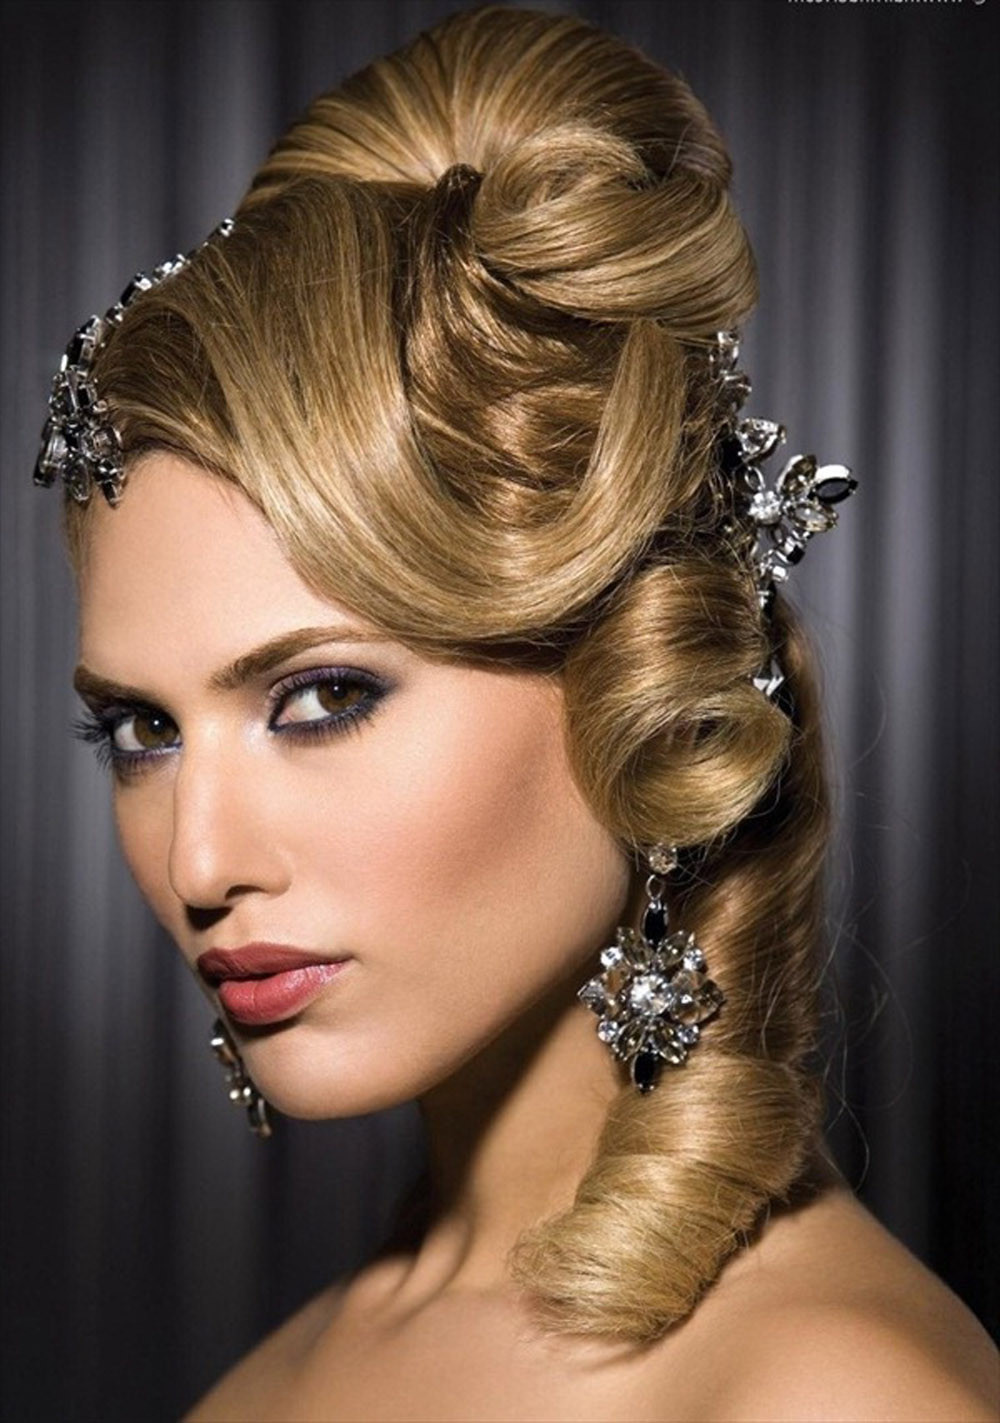 Elegant Prom Hairstyles
 20 DOs & DONTs Prom HairStyles For Long Hair – Prom